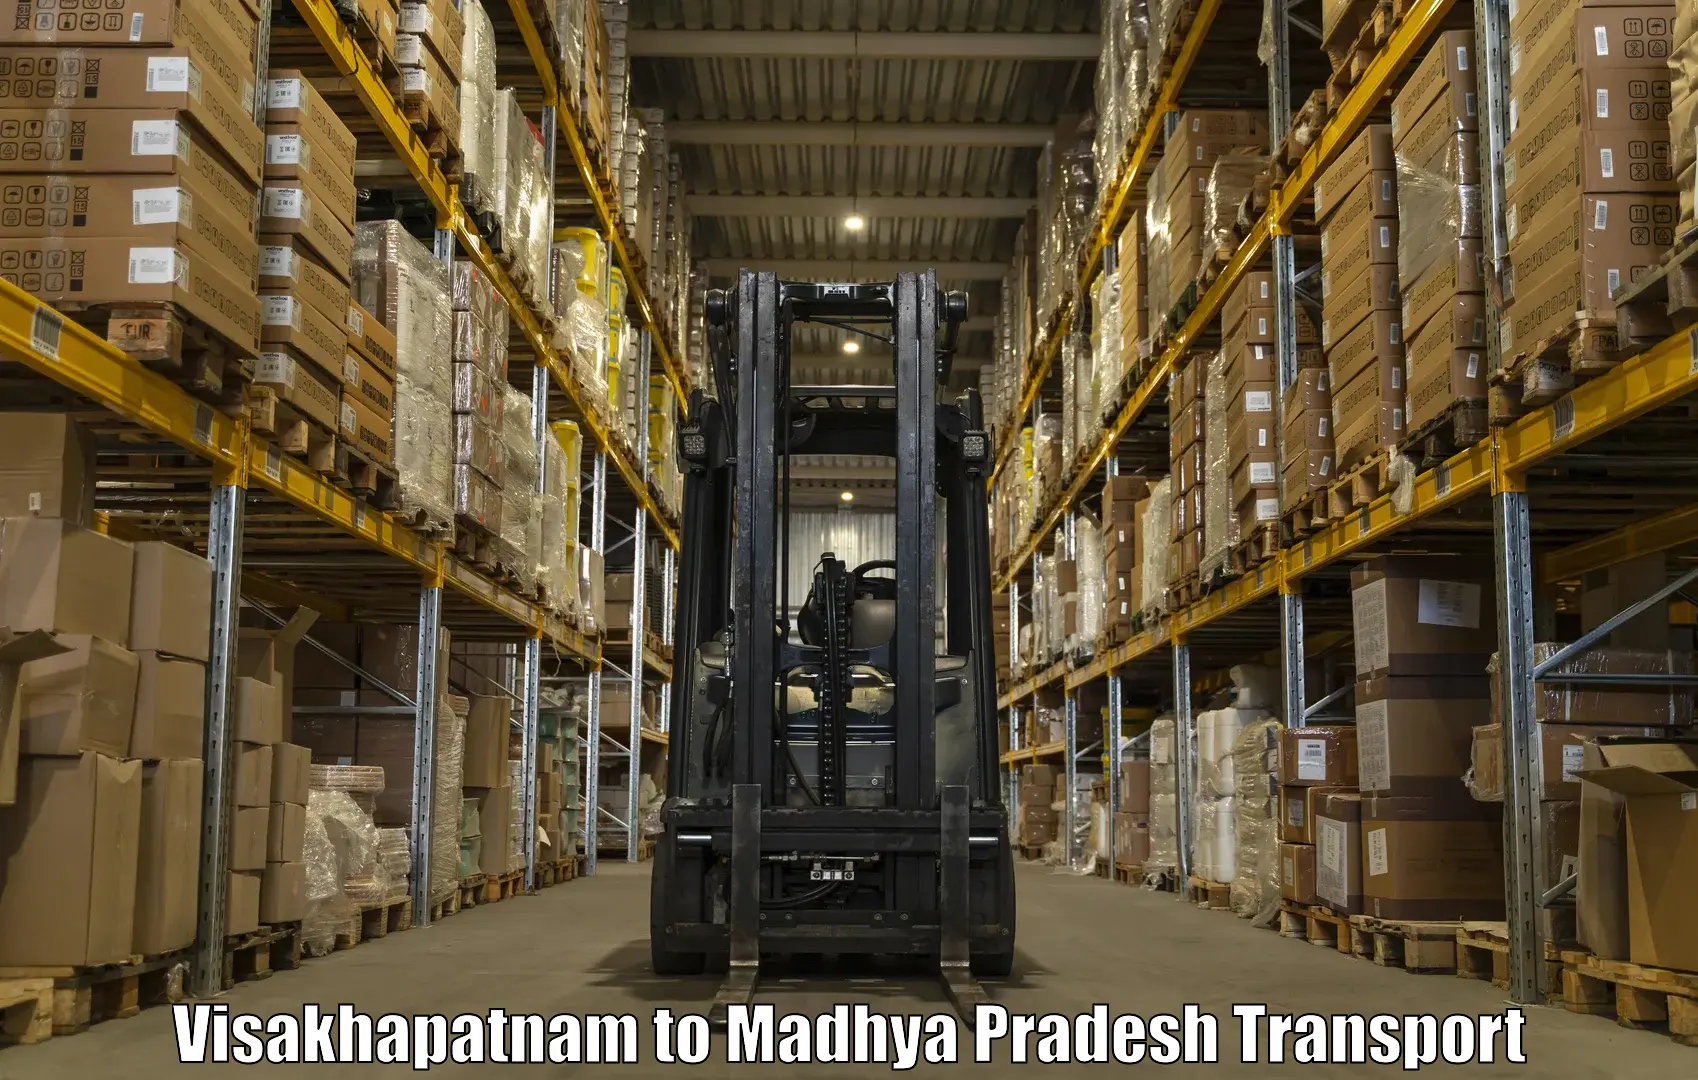 Air freight transport services in Visakhapatnam to Chitrangi